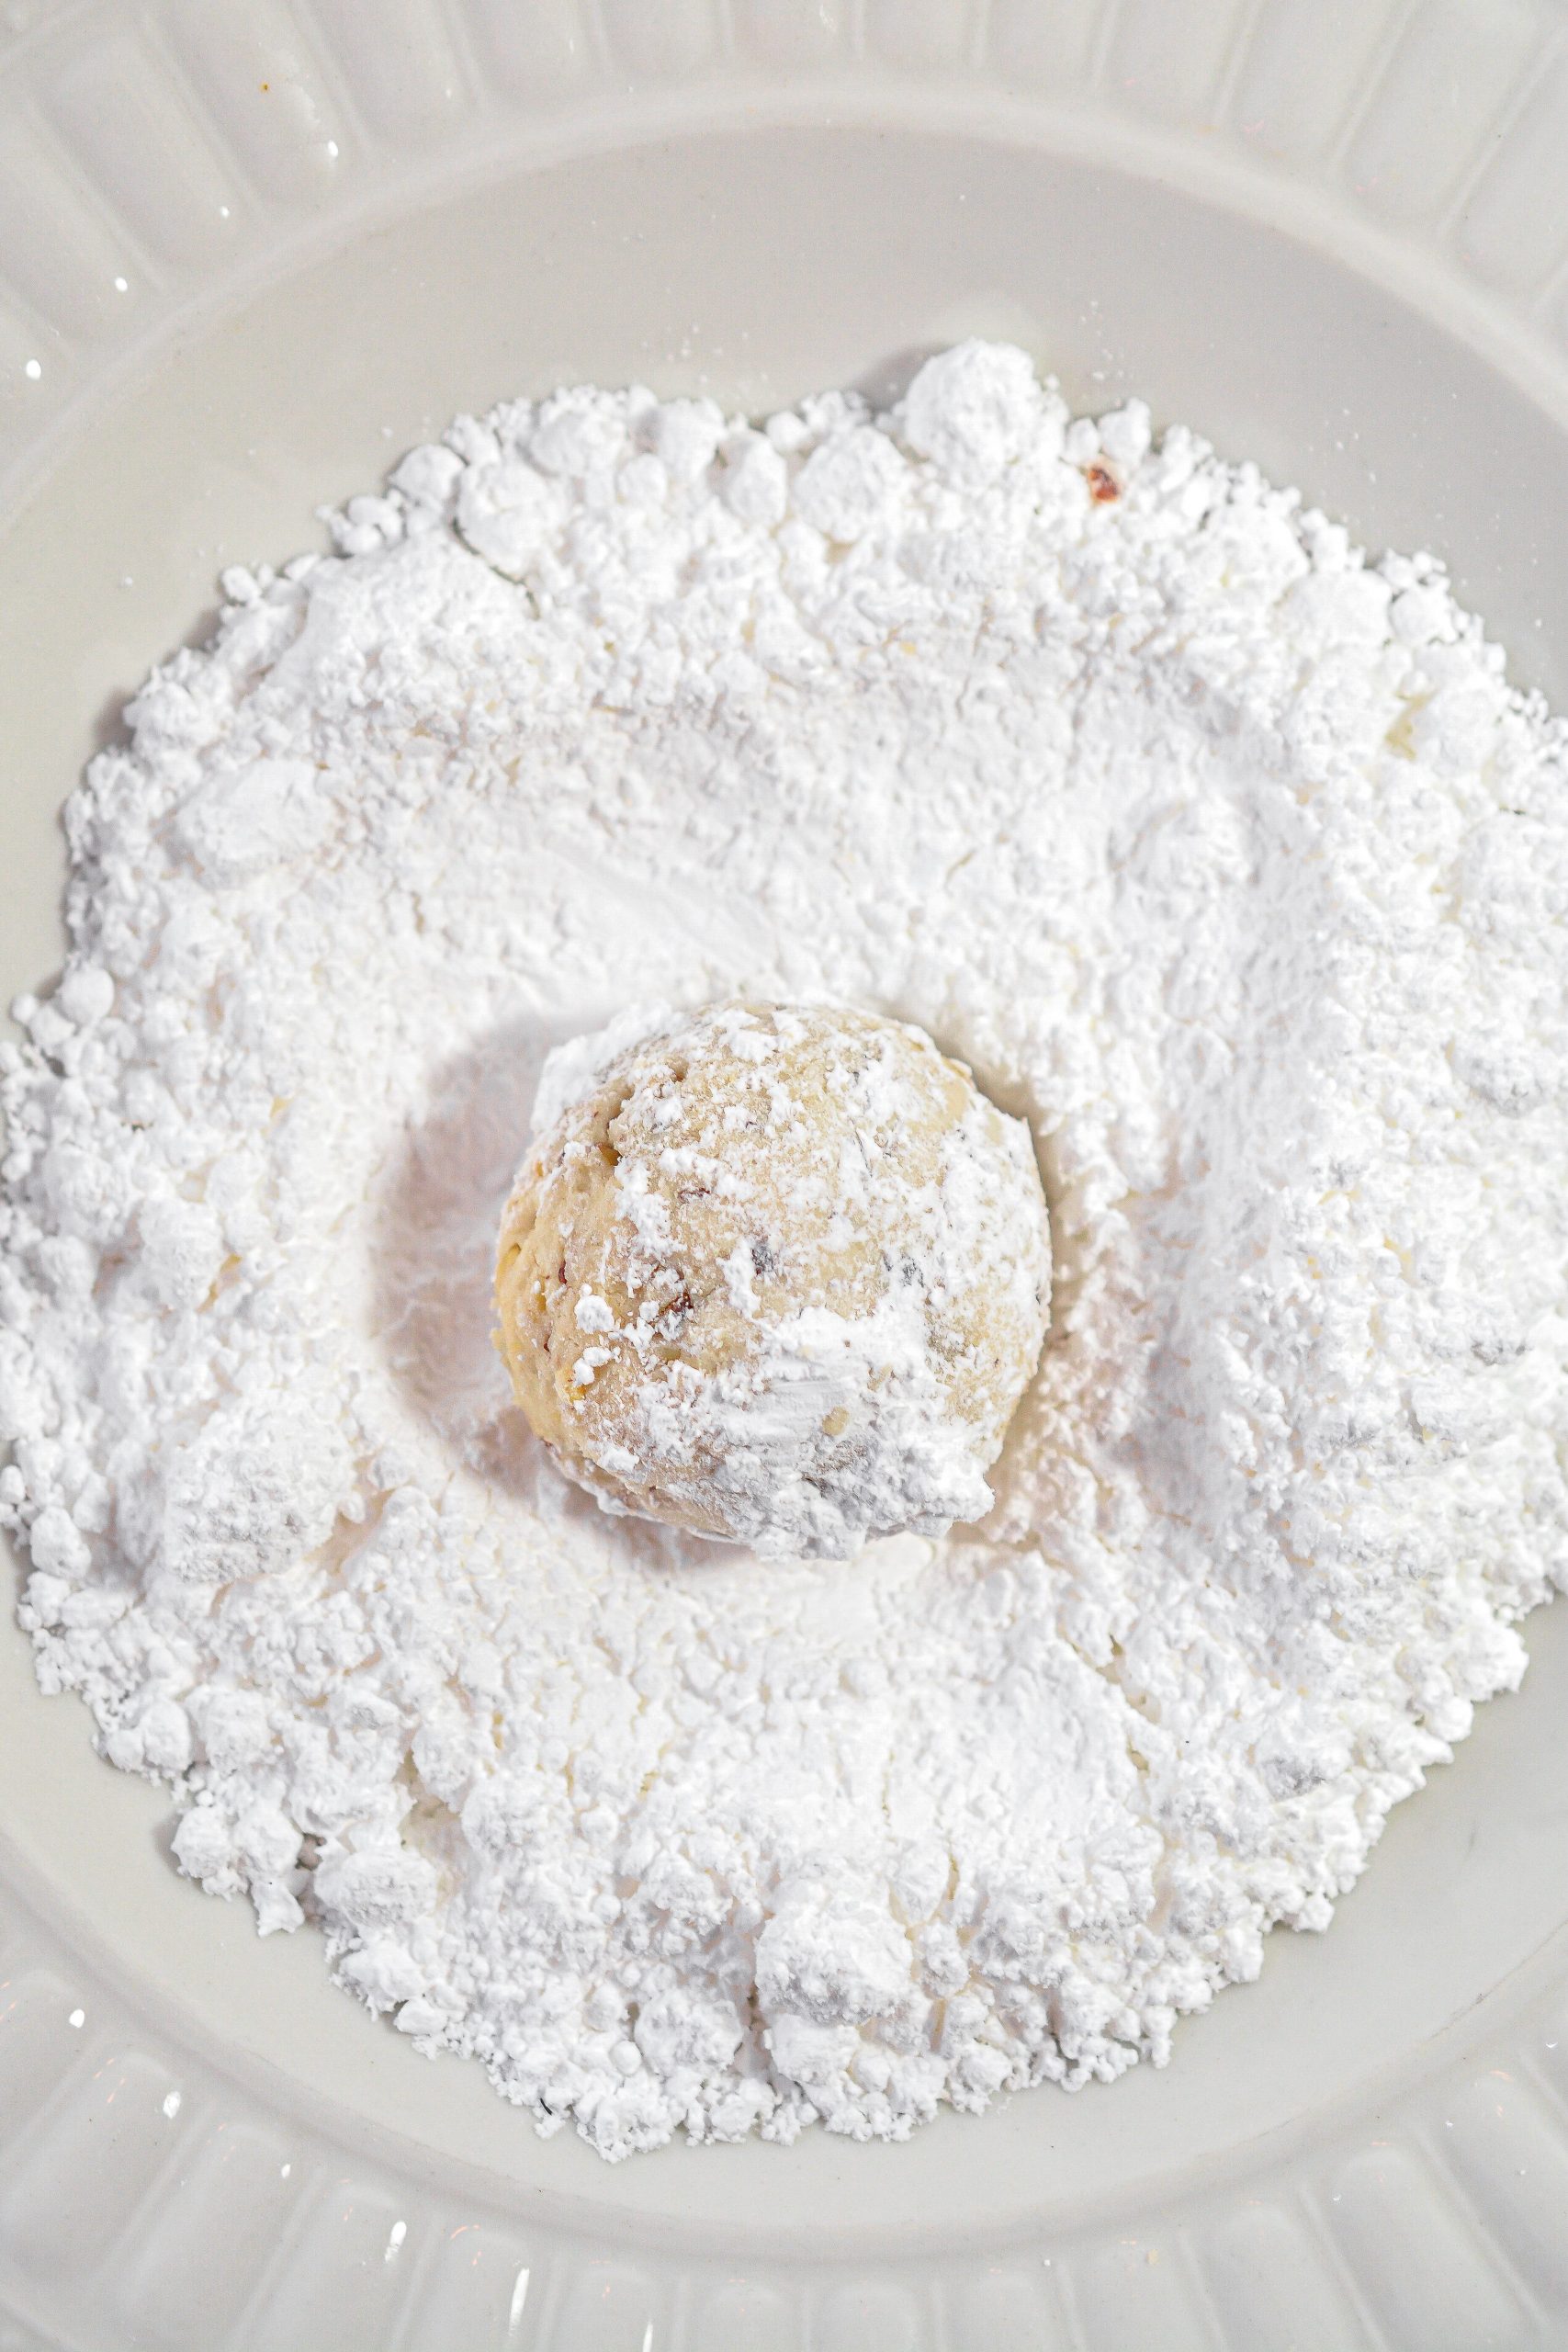 Roll the cookies in the powdered sugar.